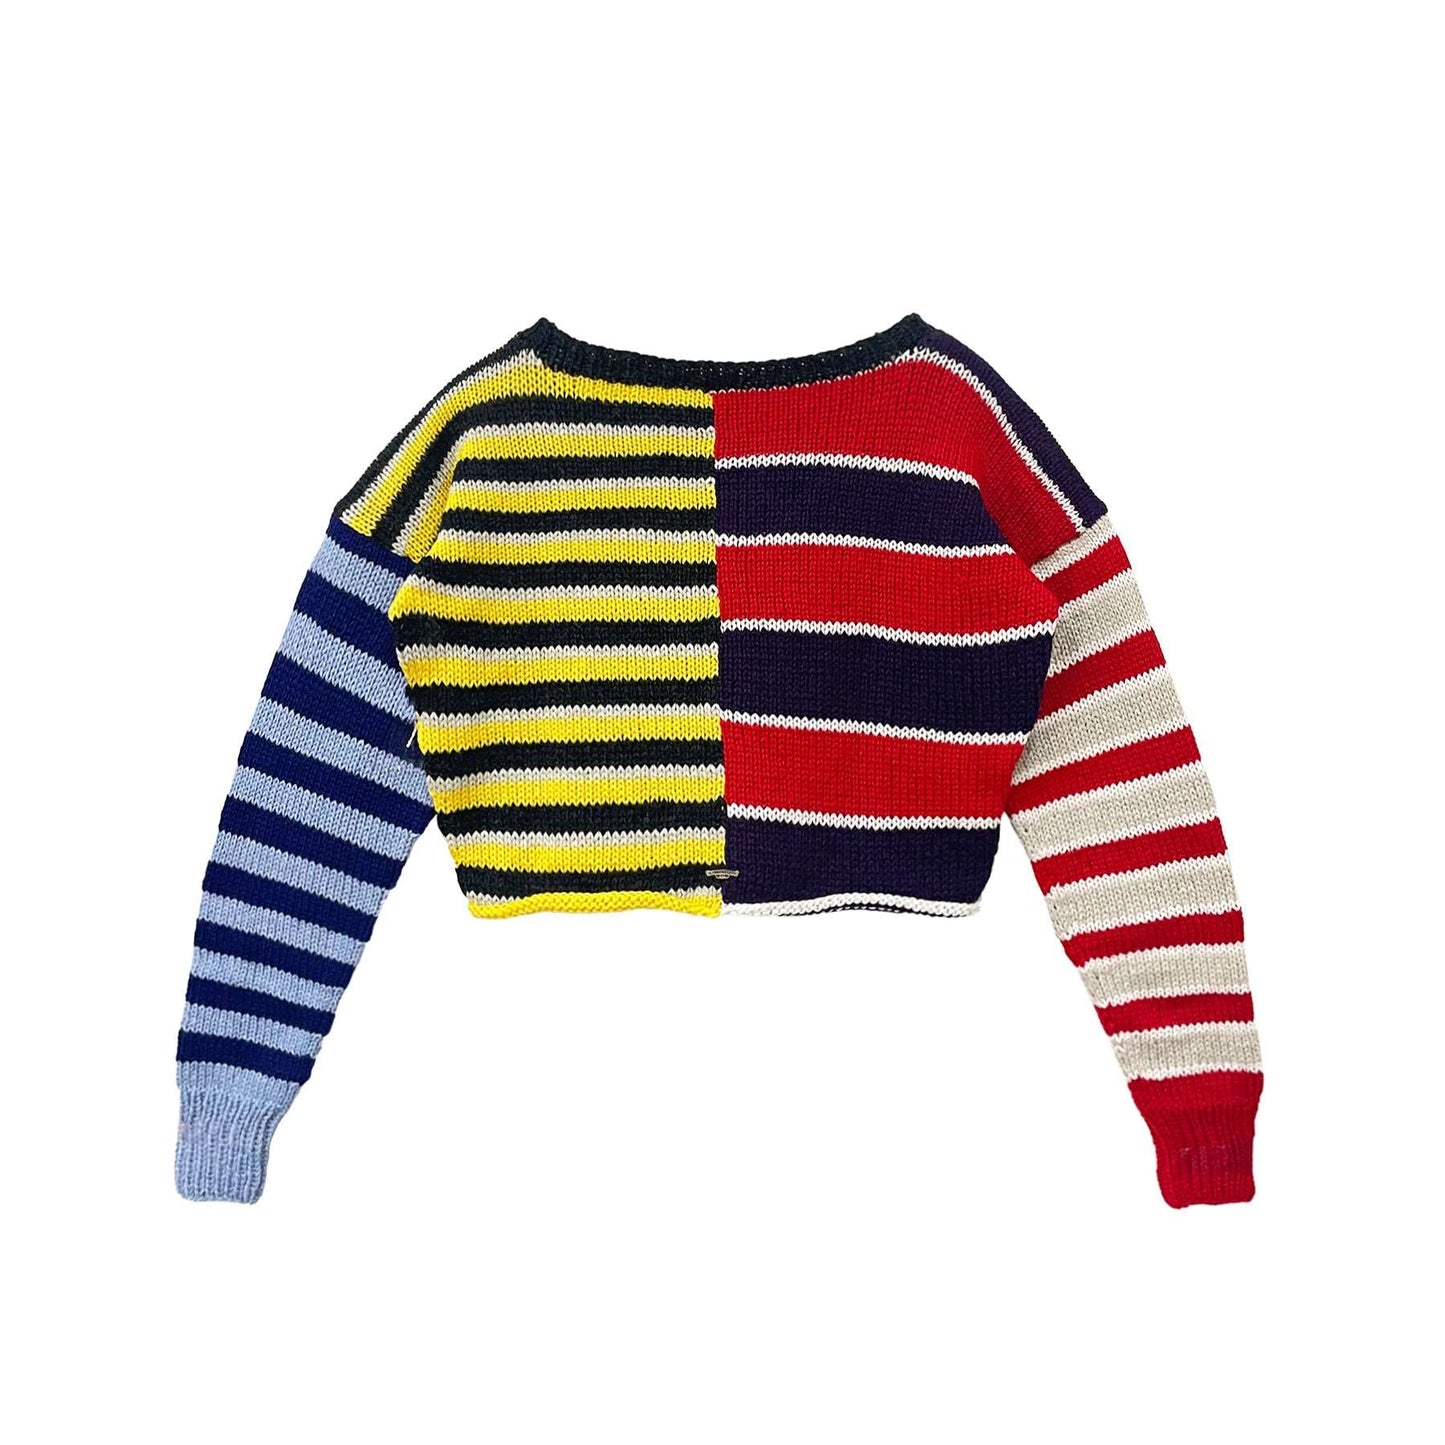 Chrome Hearts Cashmere Striped Patchwork Blue Cross Leather Short Sweater - SHENGLI ROAD MARKET